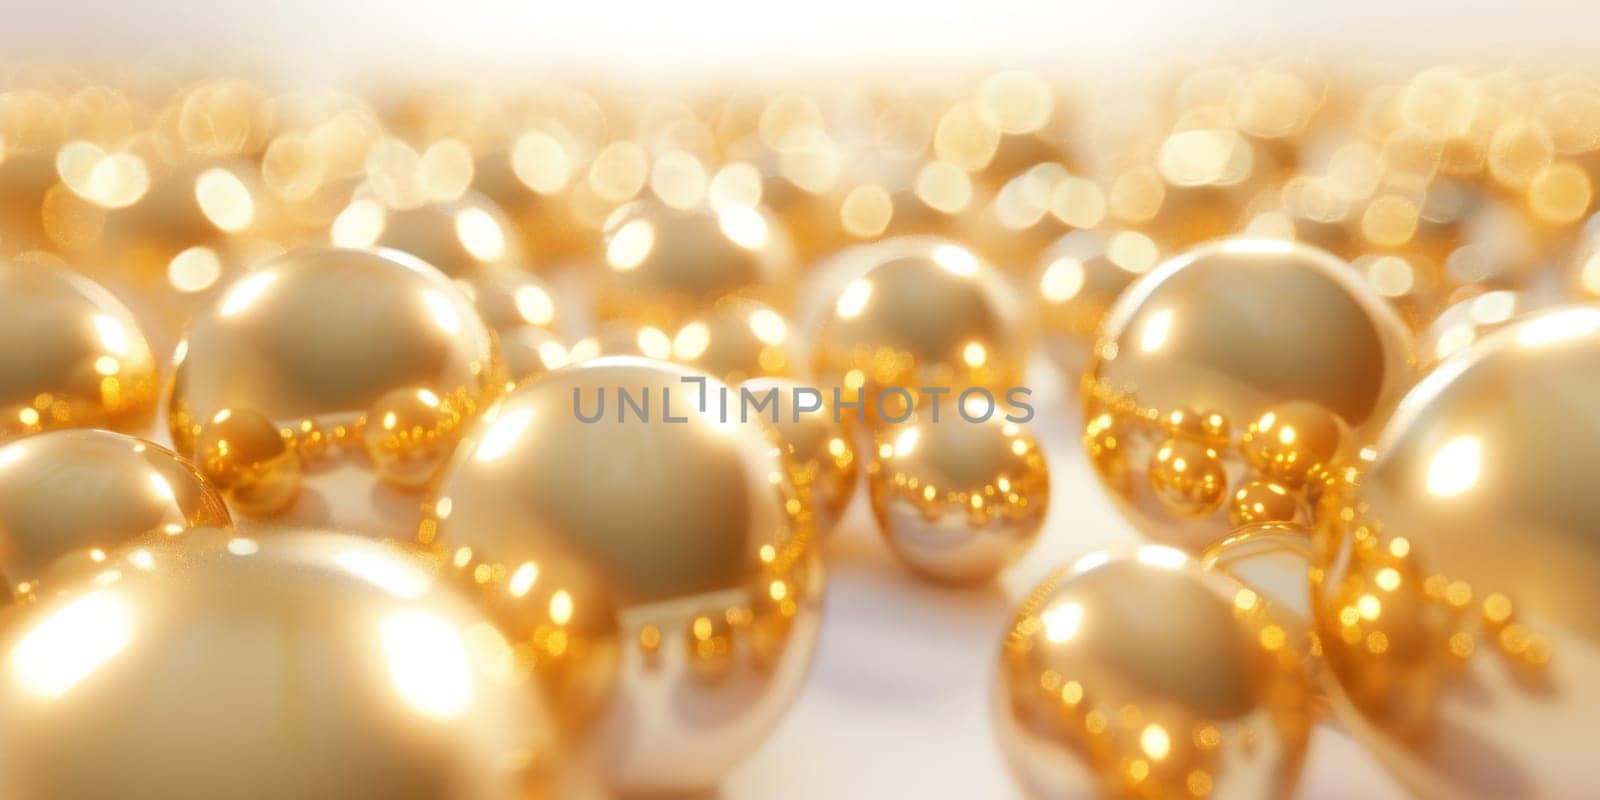 Shiny gold balls on bright white background elegant decorative ornaments for luxurious event display by Vichizh